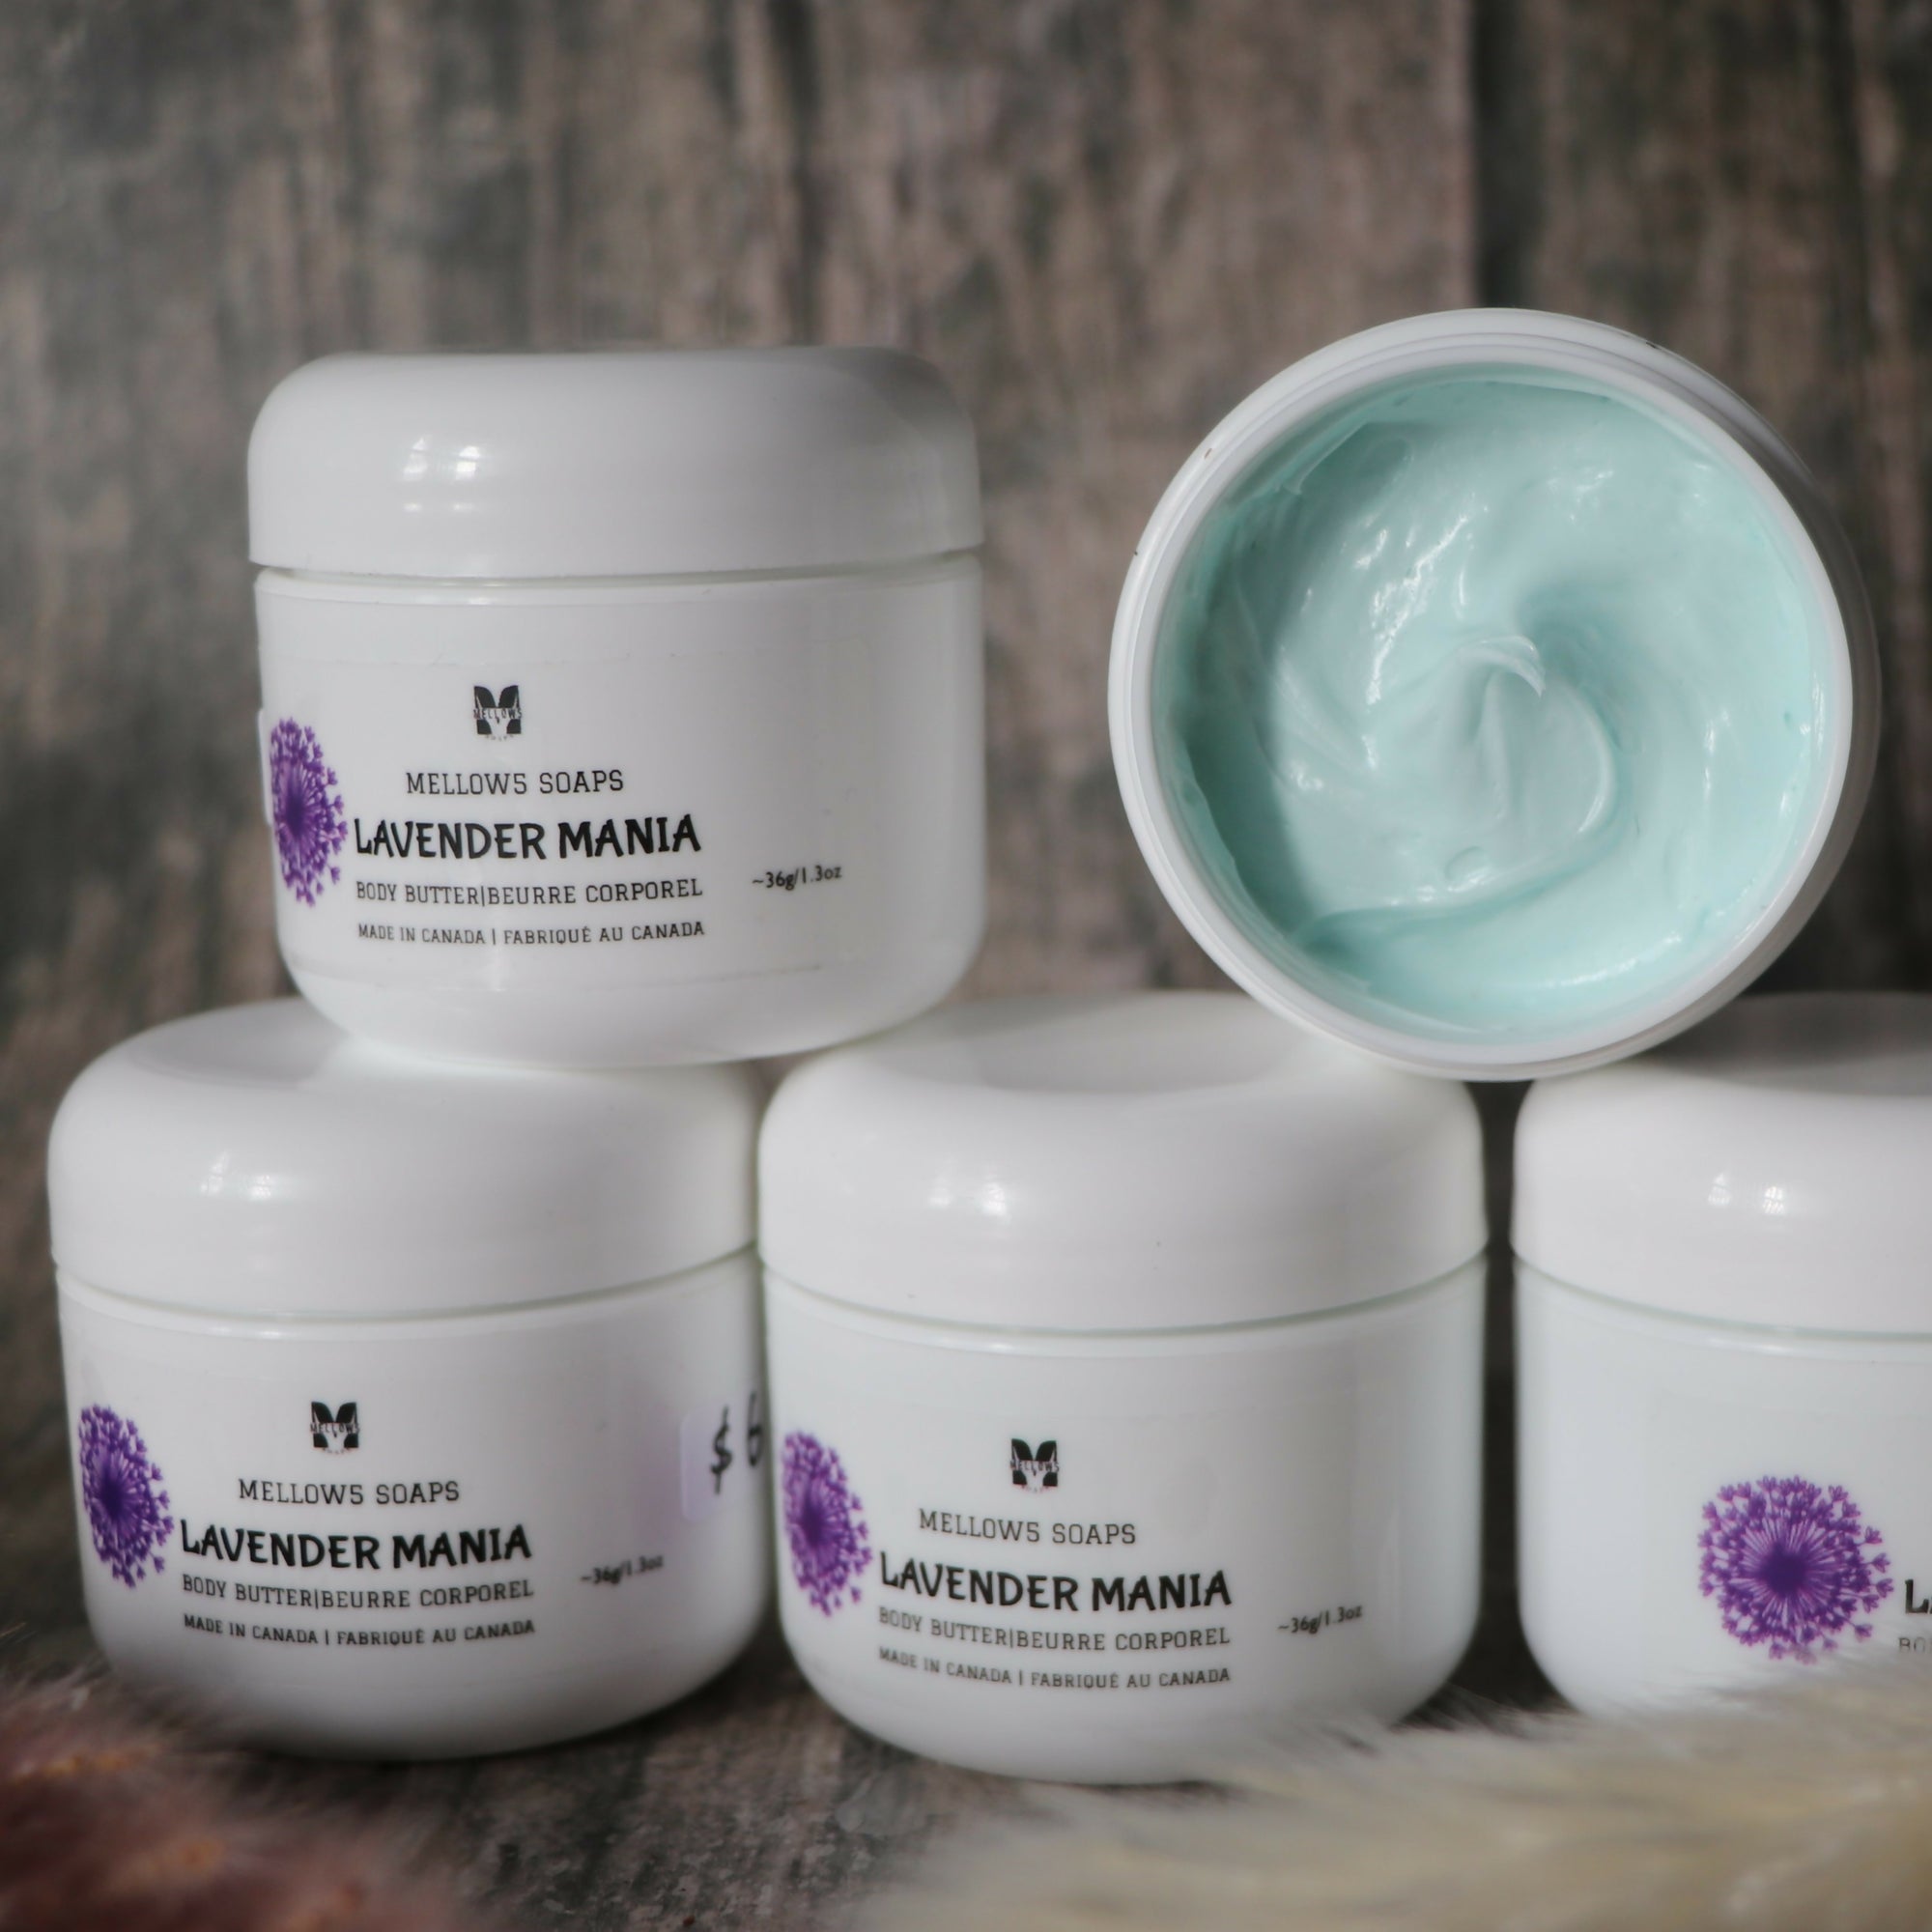 Mellow5 Soaps | Lavender Mania Body Butter